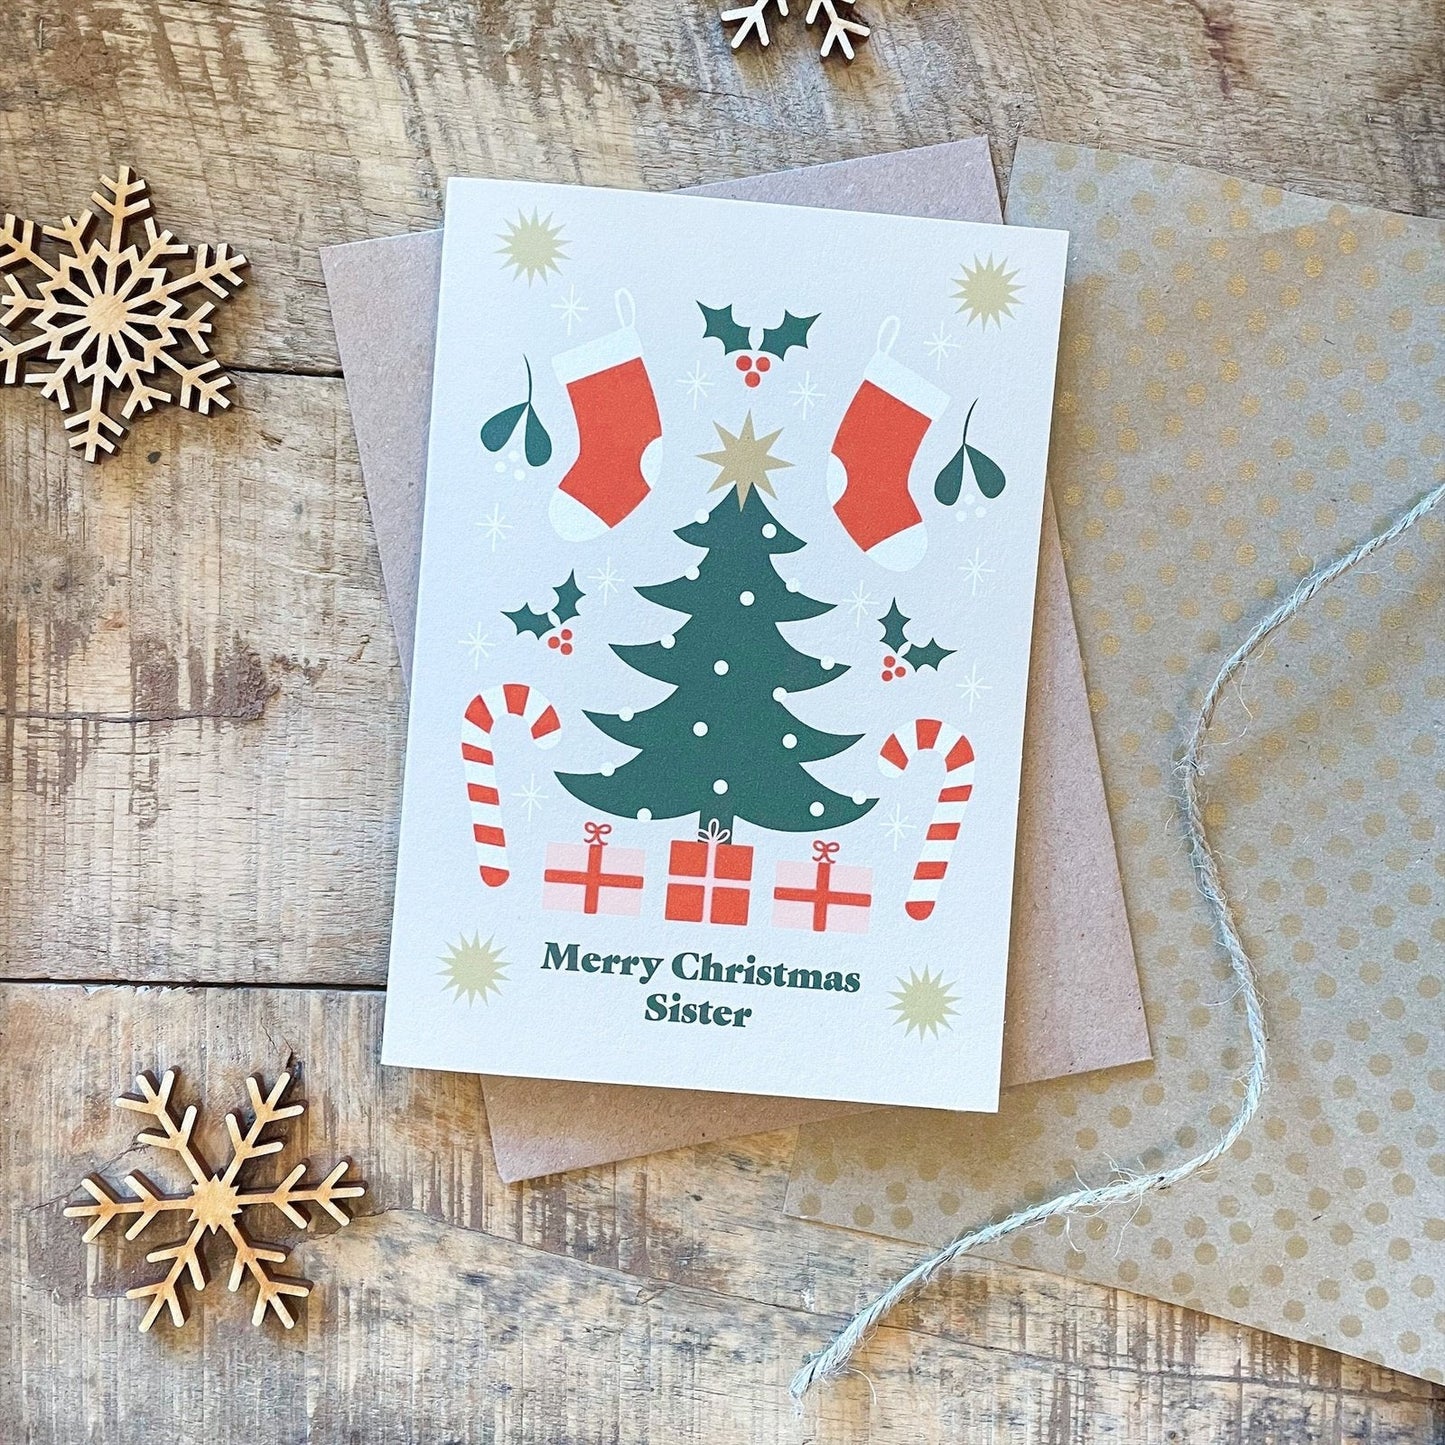 'Merry Christmas Sister' Recycled Coffee Cup Christmas Card